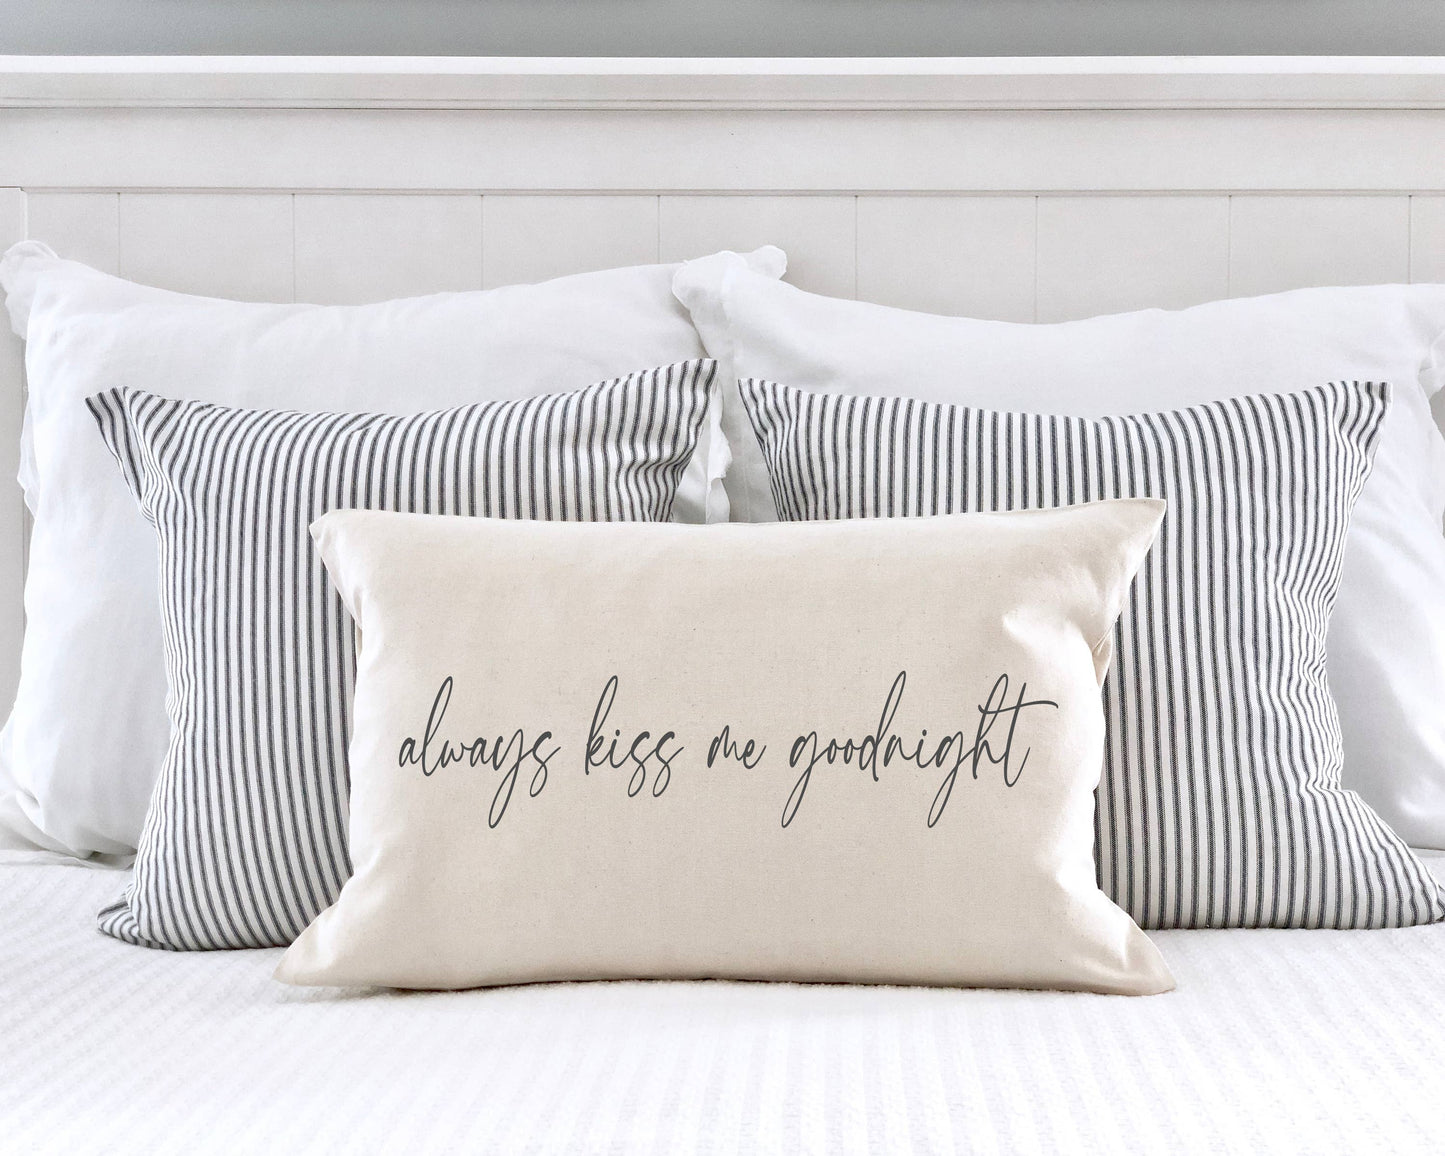 Always Kiss Me Goodnight Pillow Cover 12x20 inch